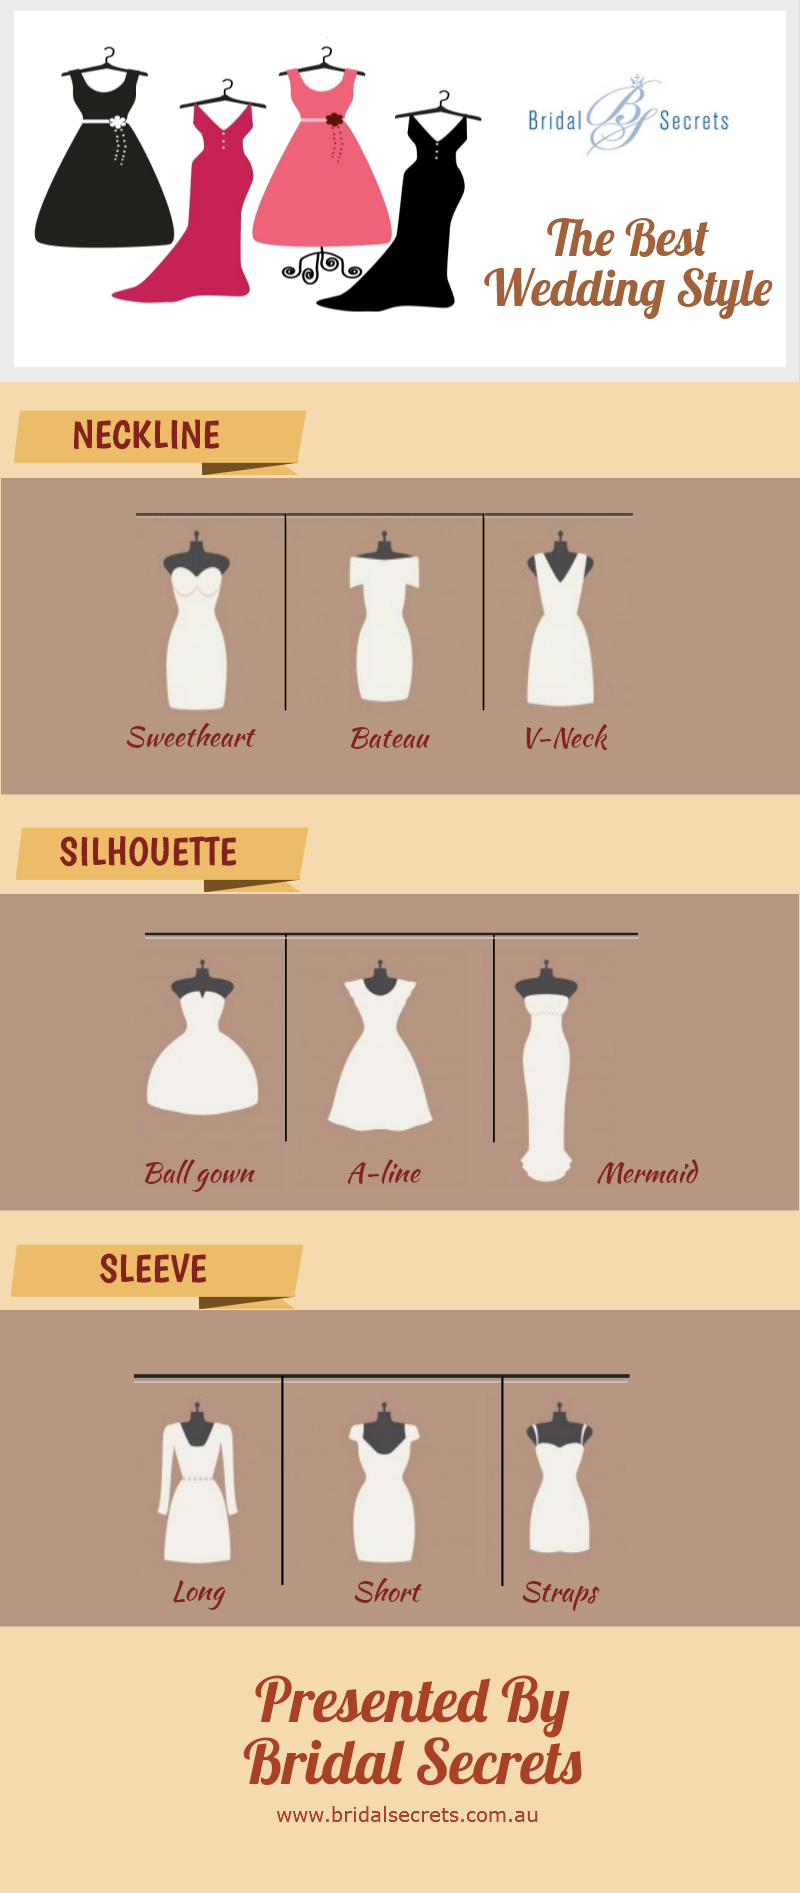 The Best Wedding Style | Visual.ly